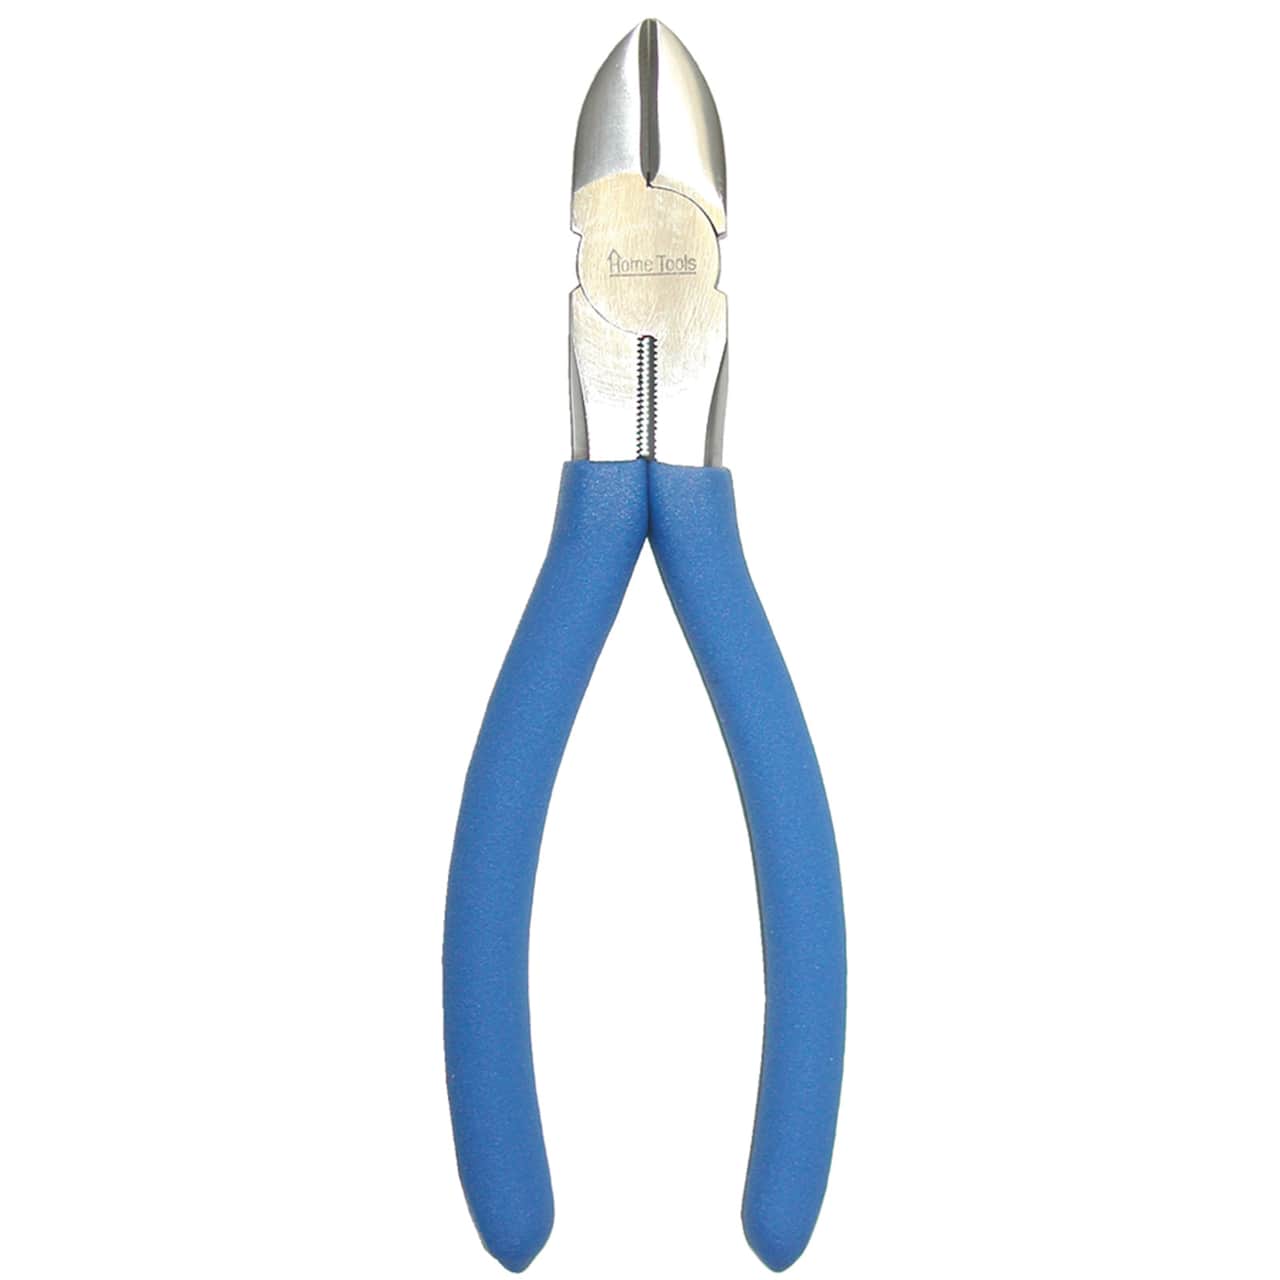 FPC Corporation 6 Wire Cutters